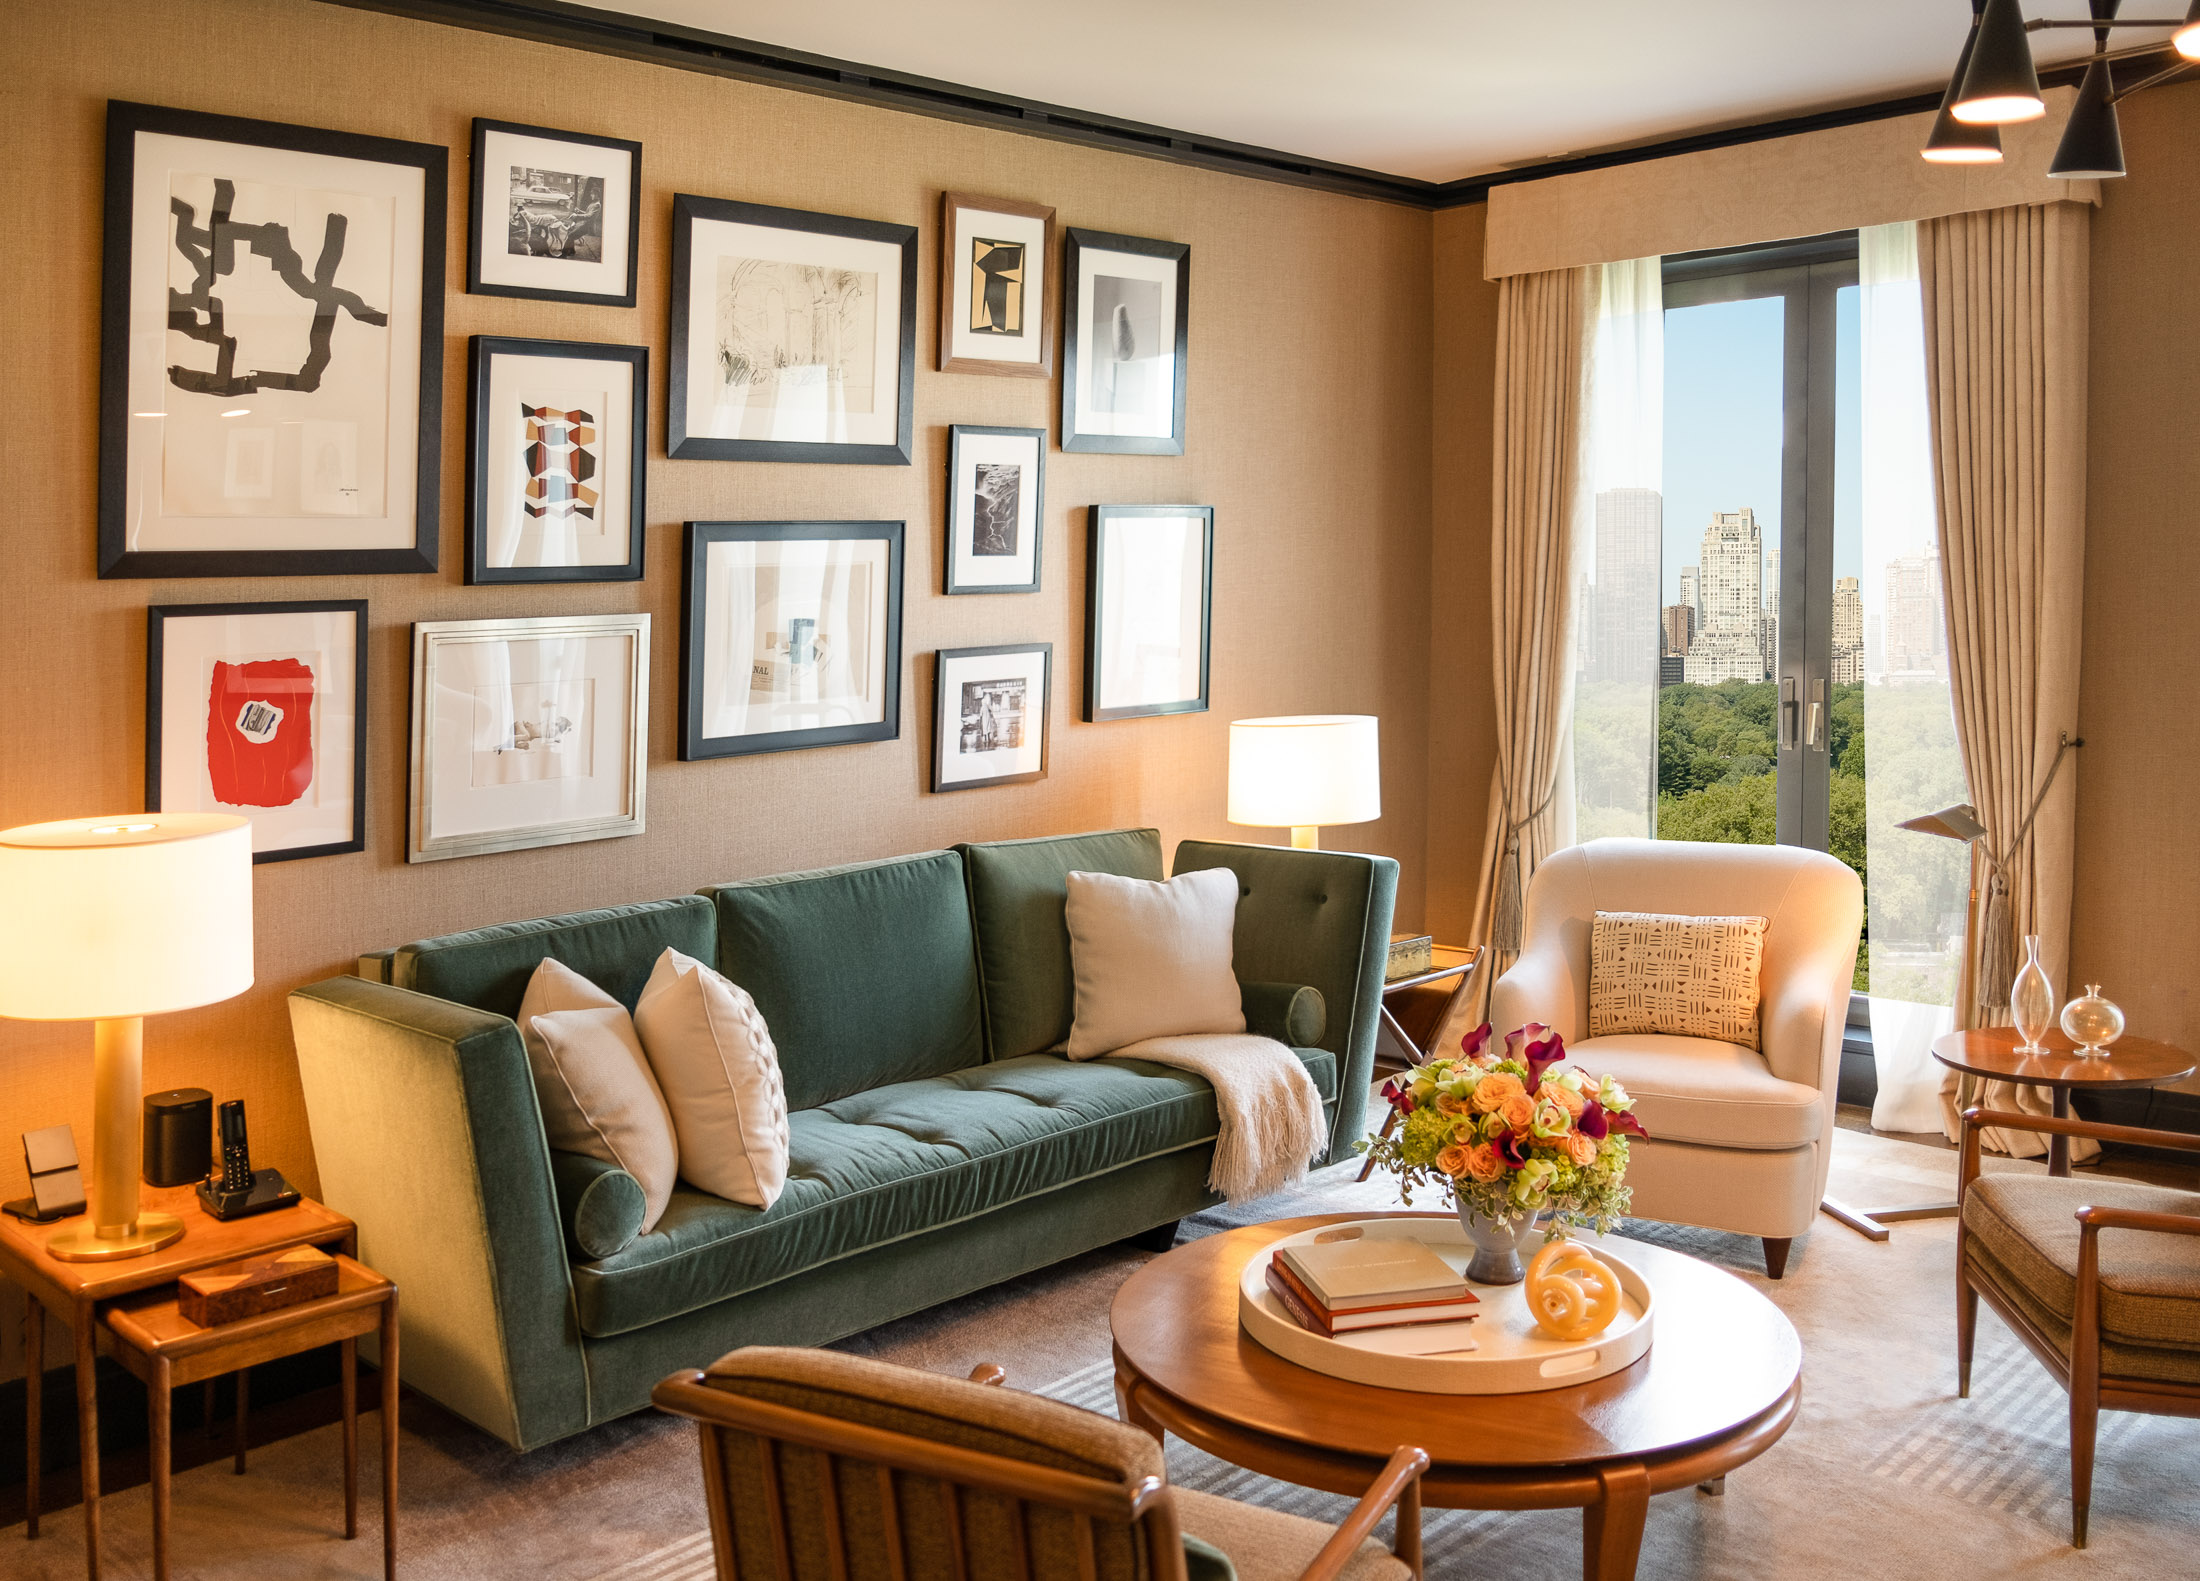 Saks Fifth Avenue opens styling suites in hotels, resorts